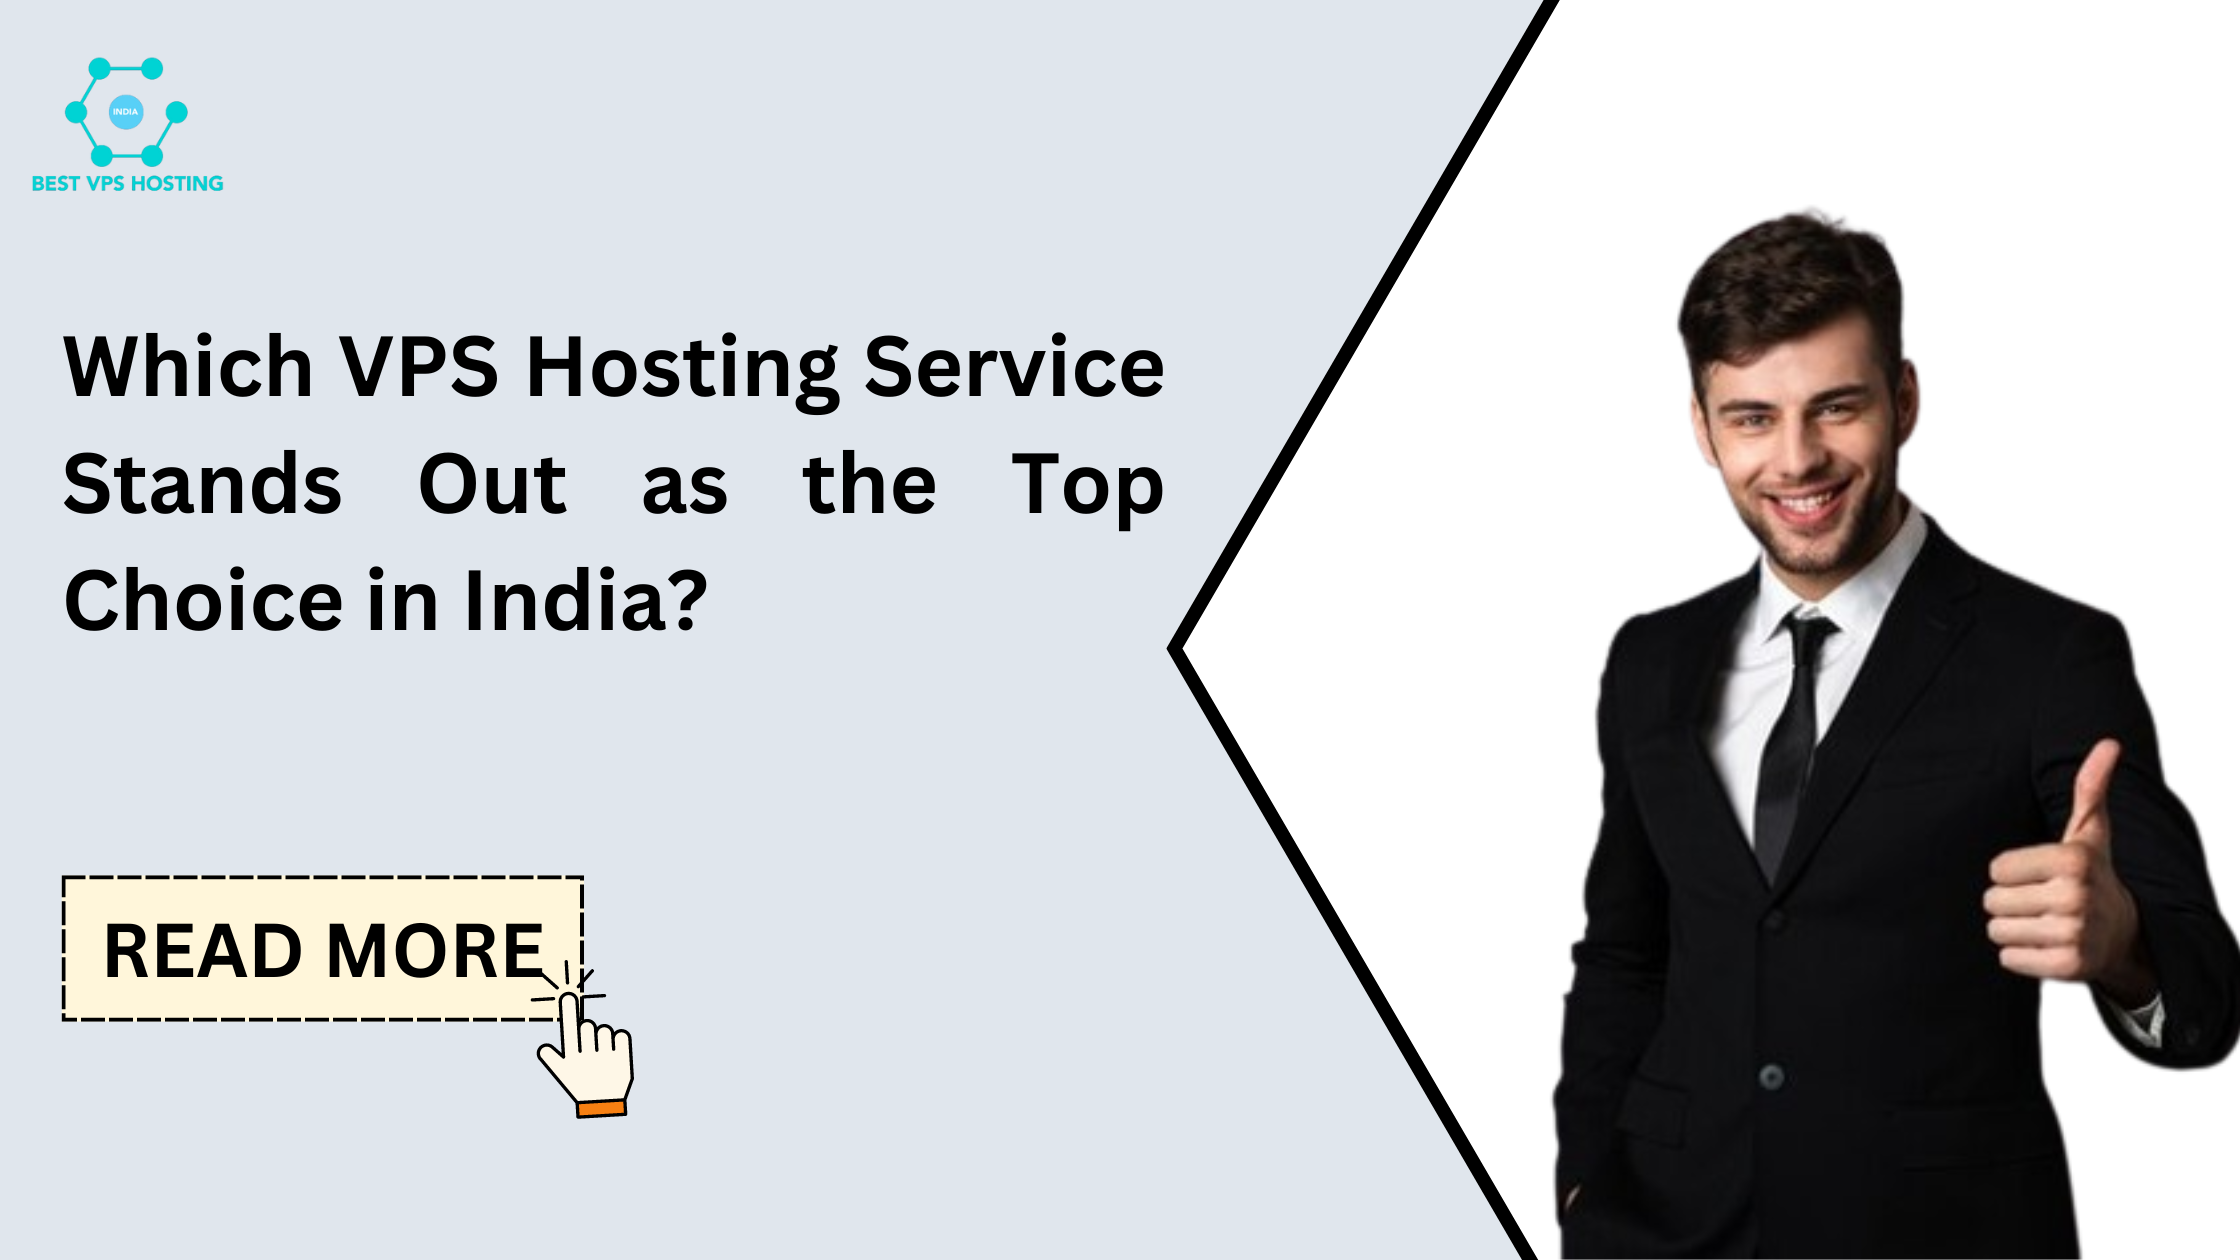 Which VPS Hosting Service Stands Out as the Top Choice in India